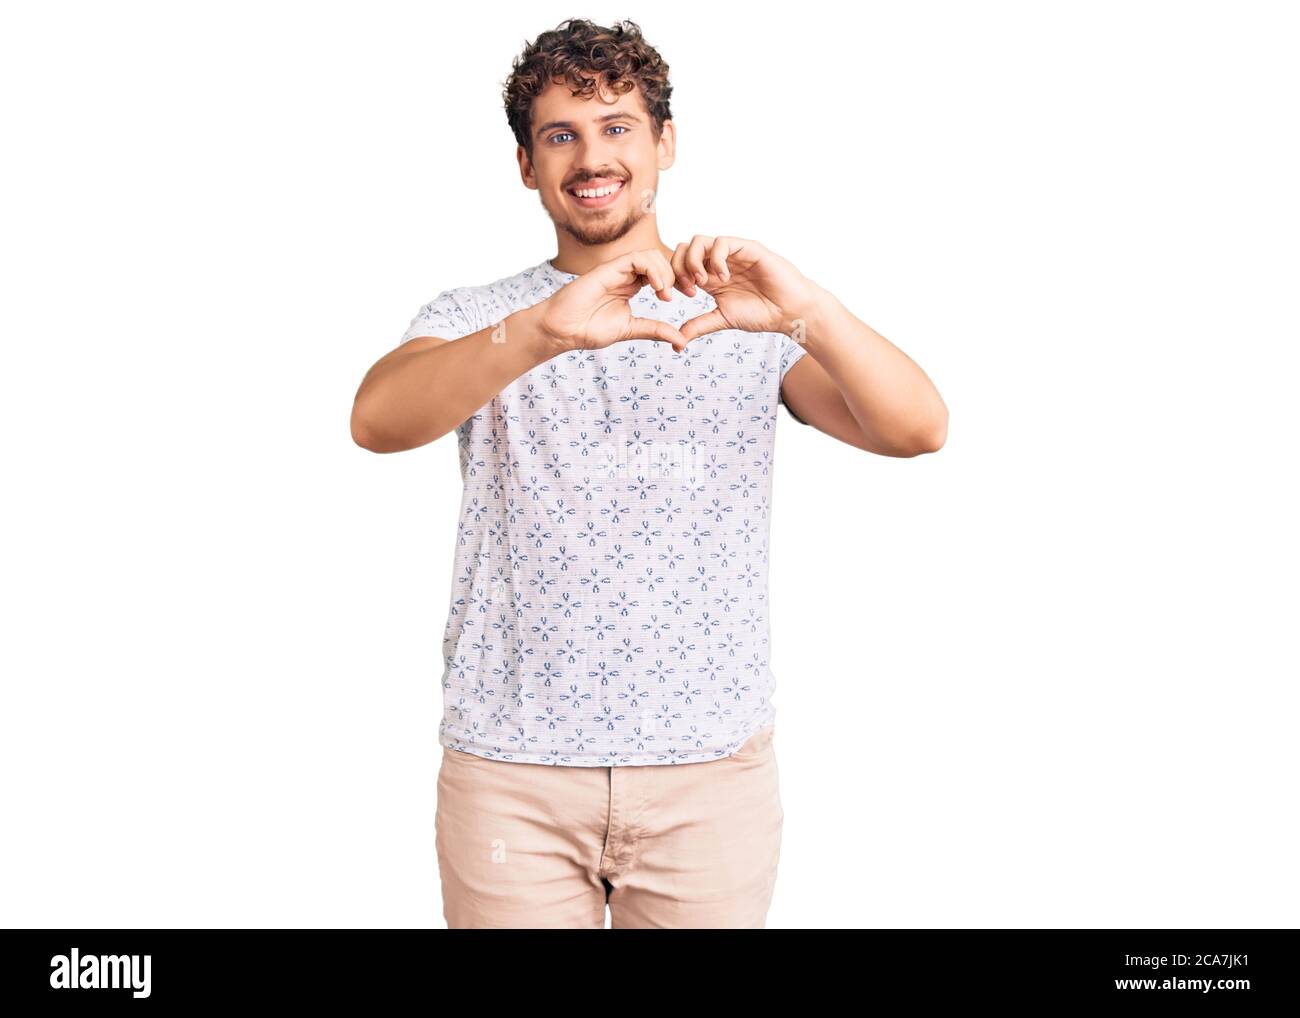 Young handsome man with curly hair wearing casual clothes smiling in love showing heart symbol and shape with hands. romantic concept. Stock Photo